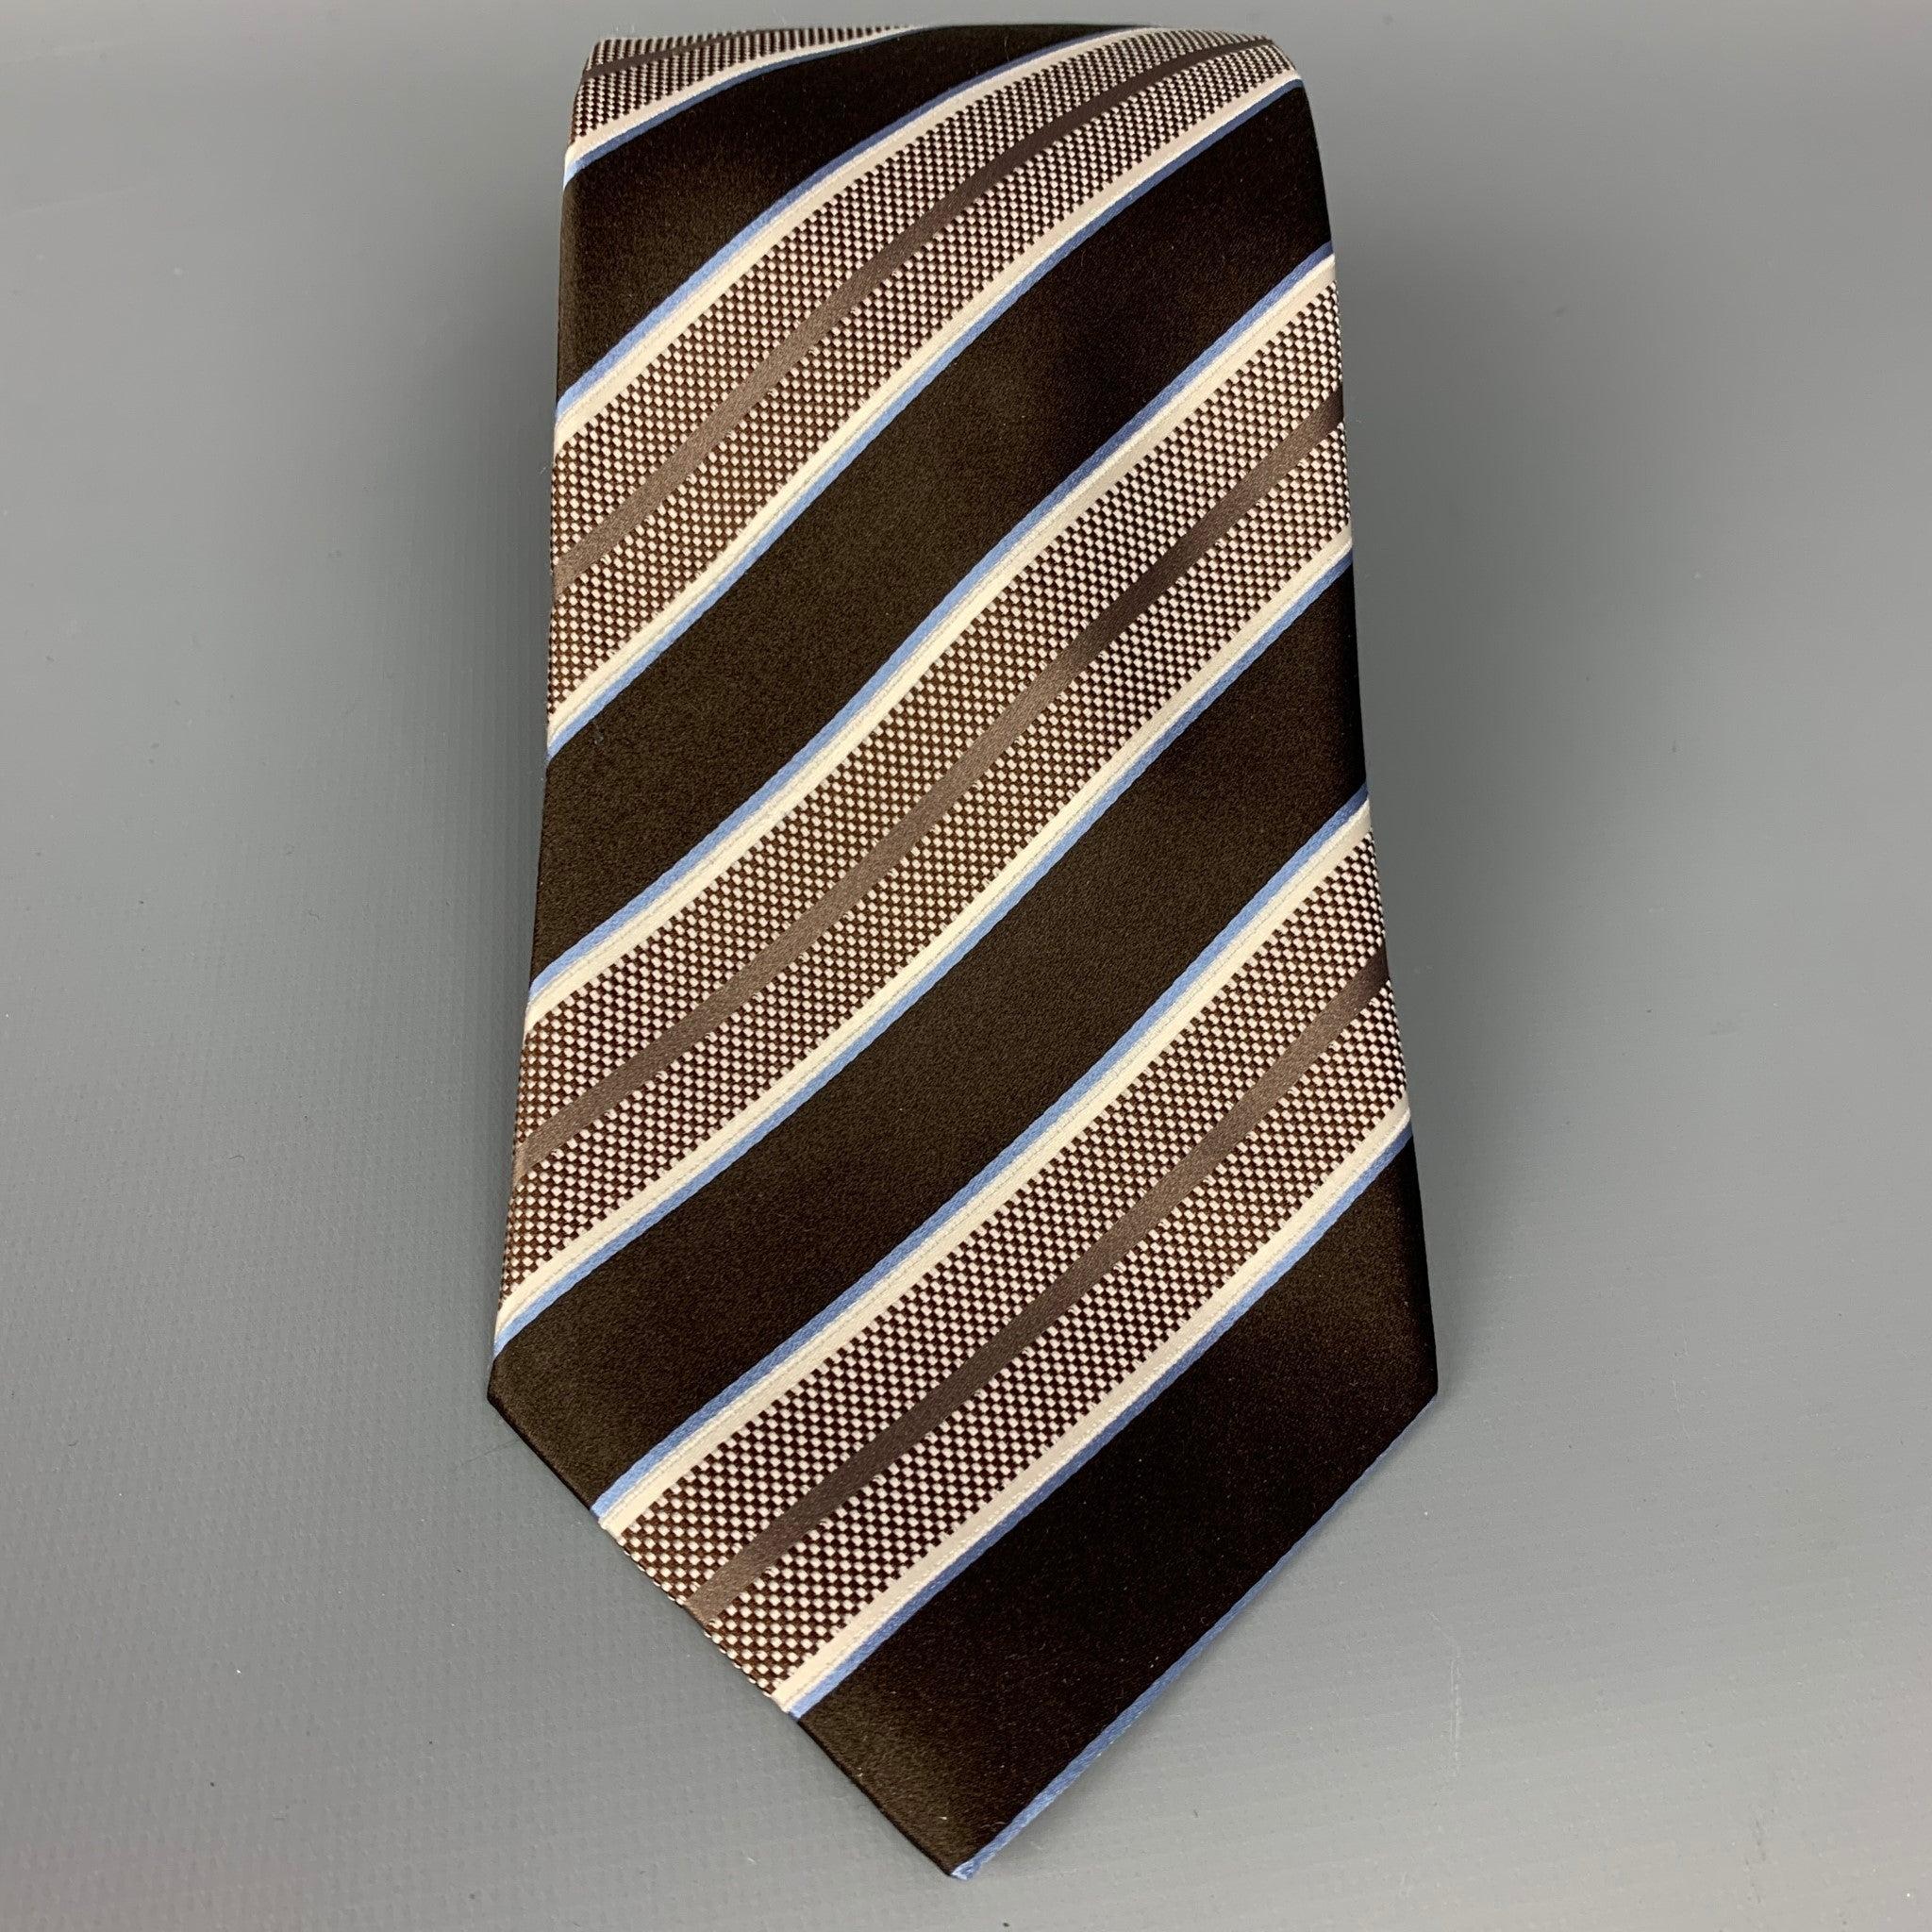 ERMENEGILDO ZEGNA neck tie comes in a brown & white stripe silk. Made in Italy.Very Good Pre-Owned Condition. Measurements.Width: 3.5 inches 
  
  
  
 Sui Generis Reference: 108399
 Category: Tie
 More Details
  
 Brand: ERMENEGILDO ZEGNA
 Color: